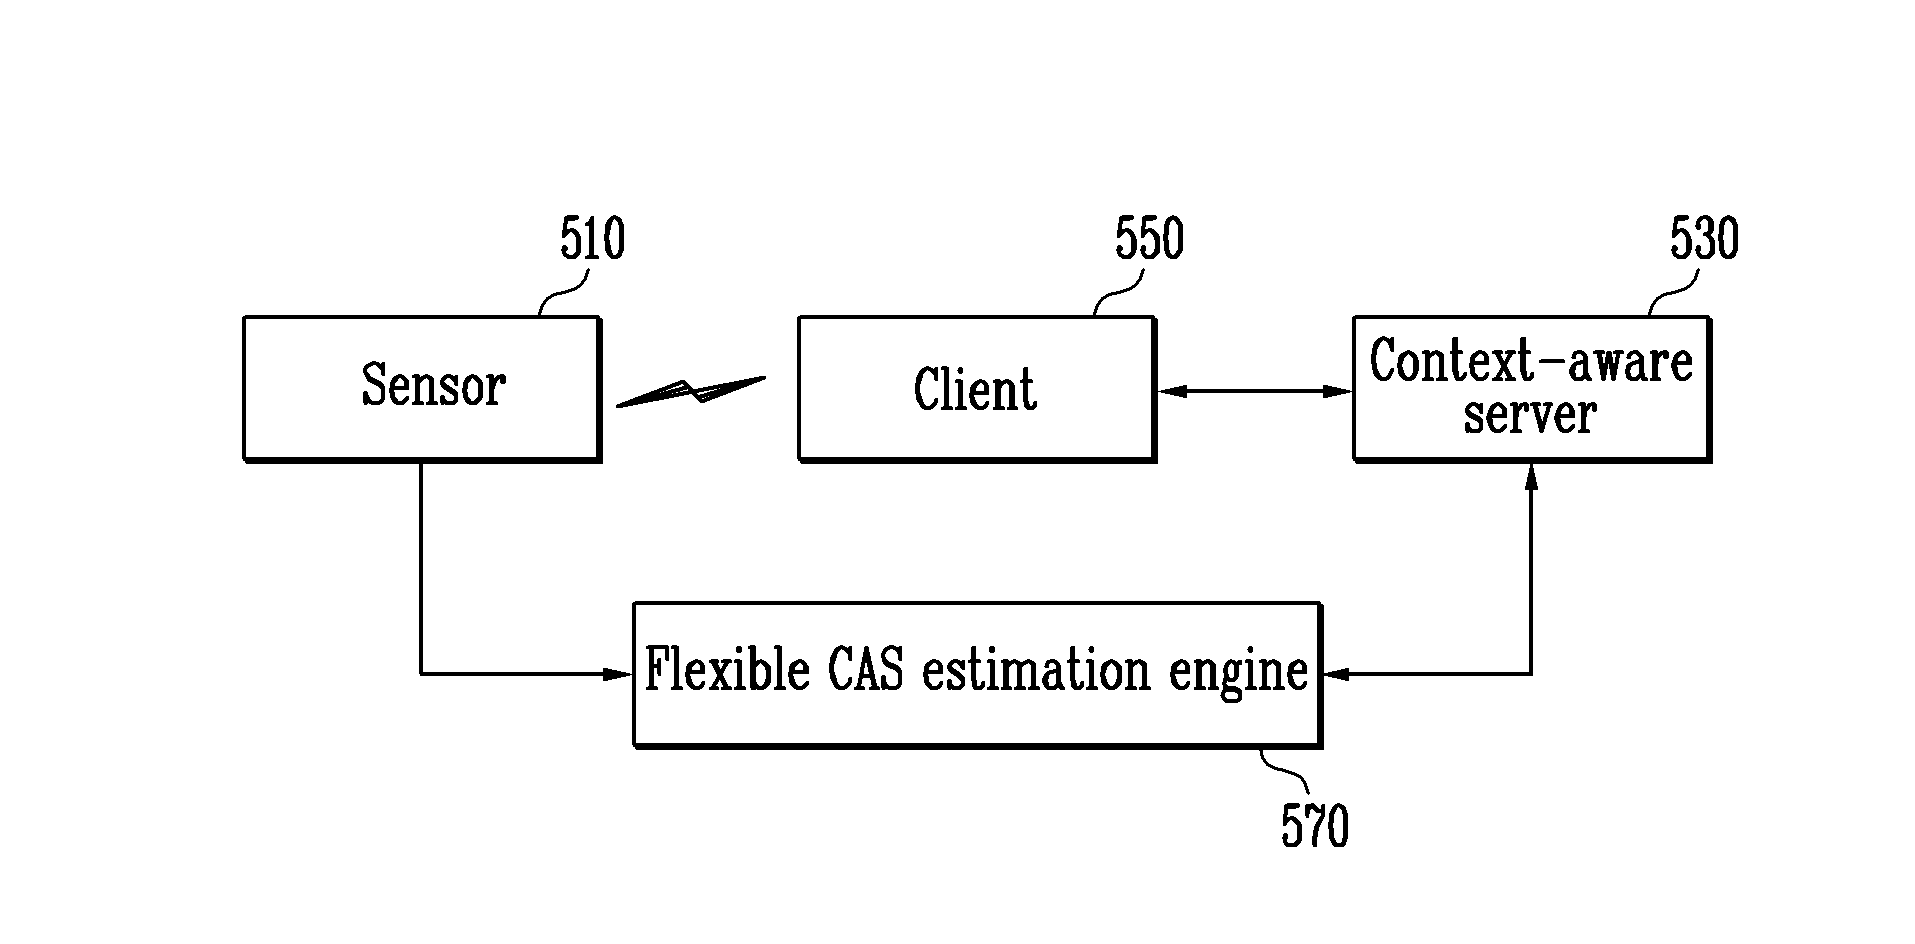 System and method for providing flexible context-aware service